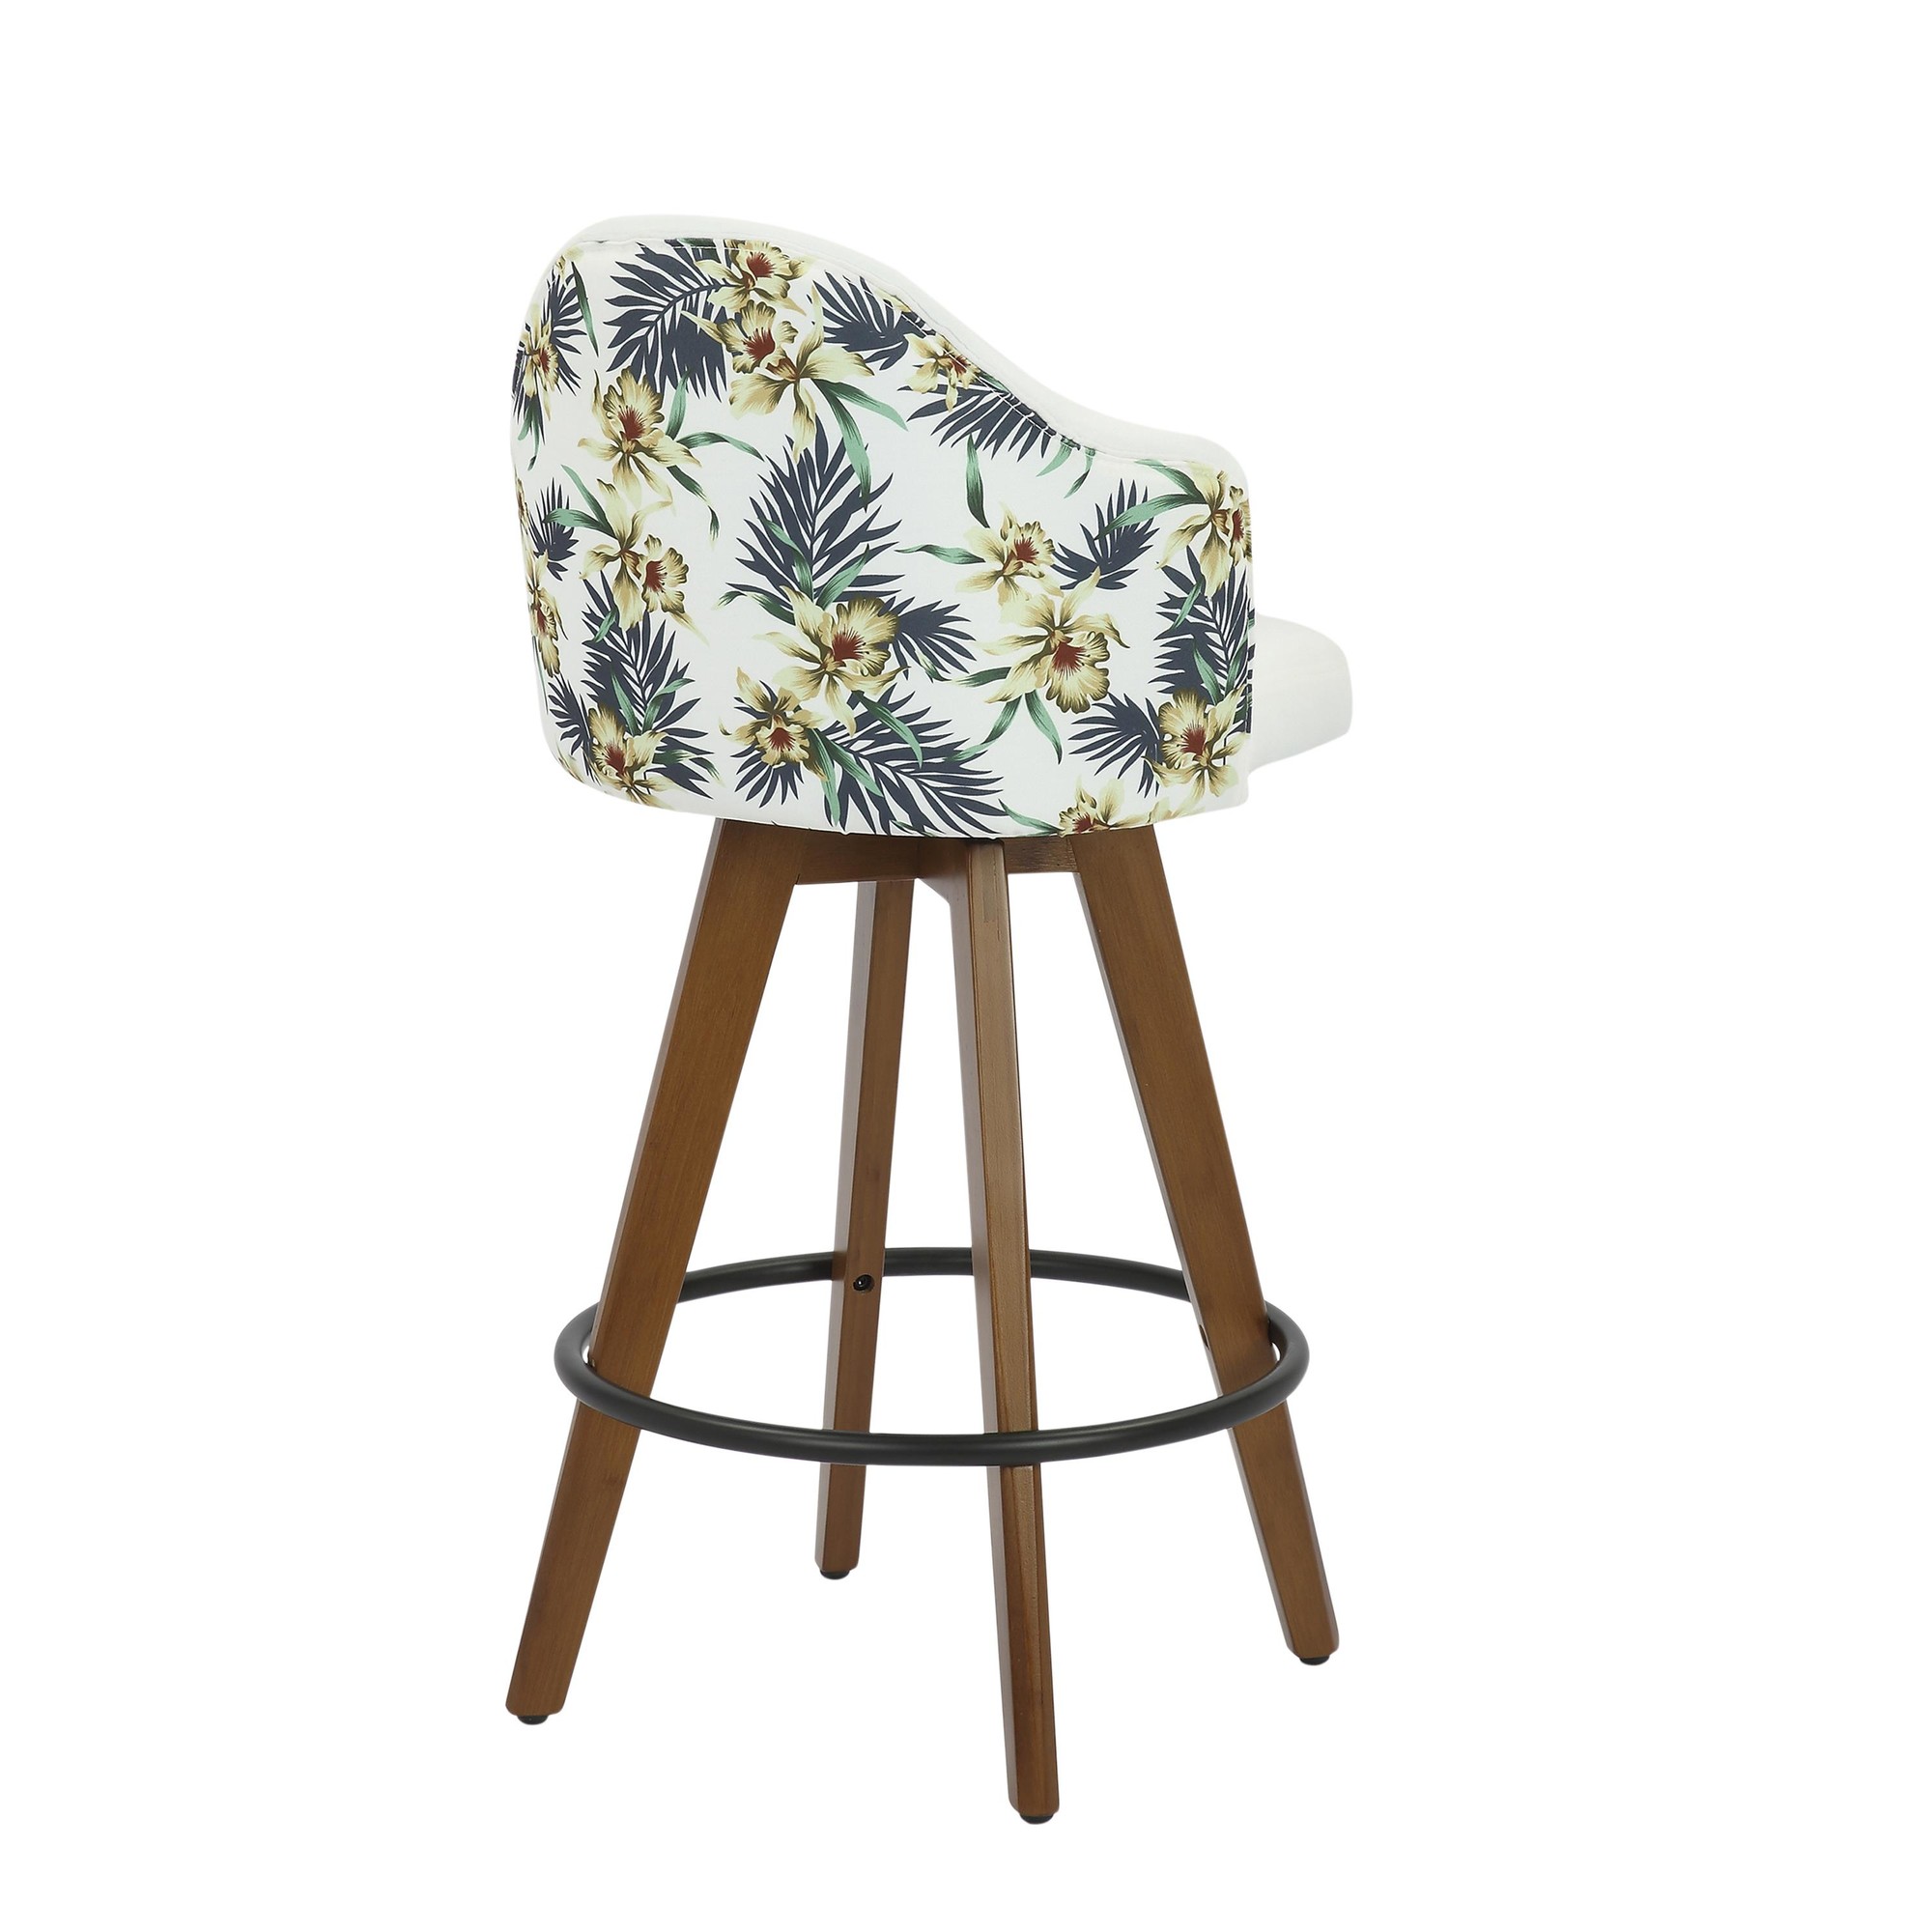 Active Height Stool with White Frame and Orange Fabric 18-26